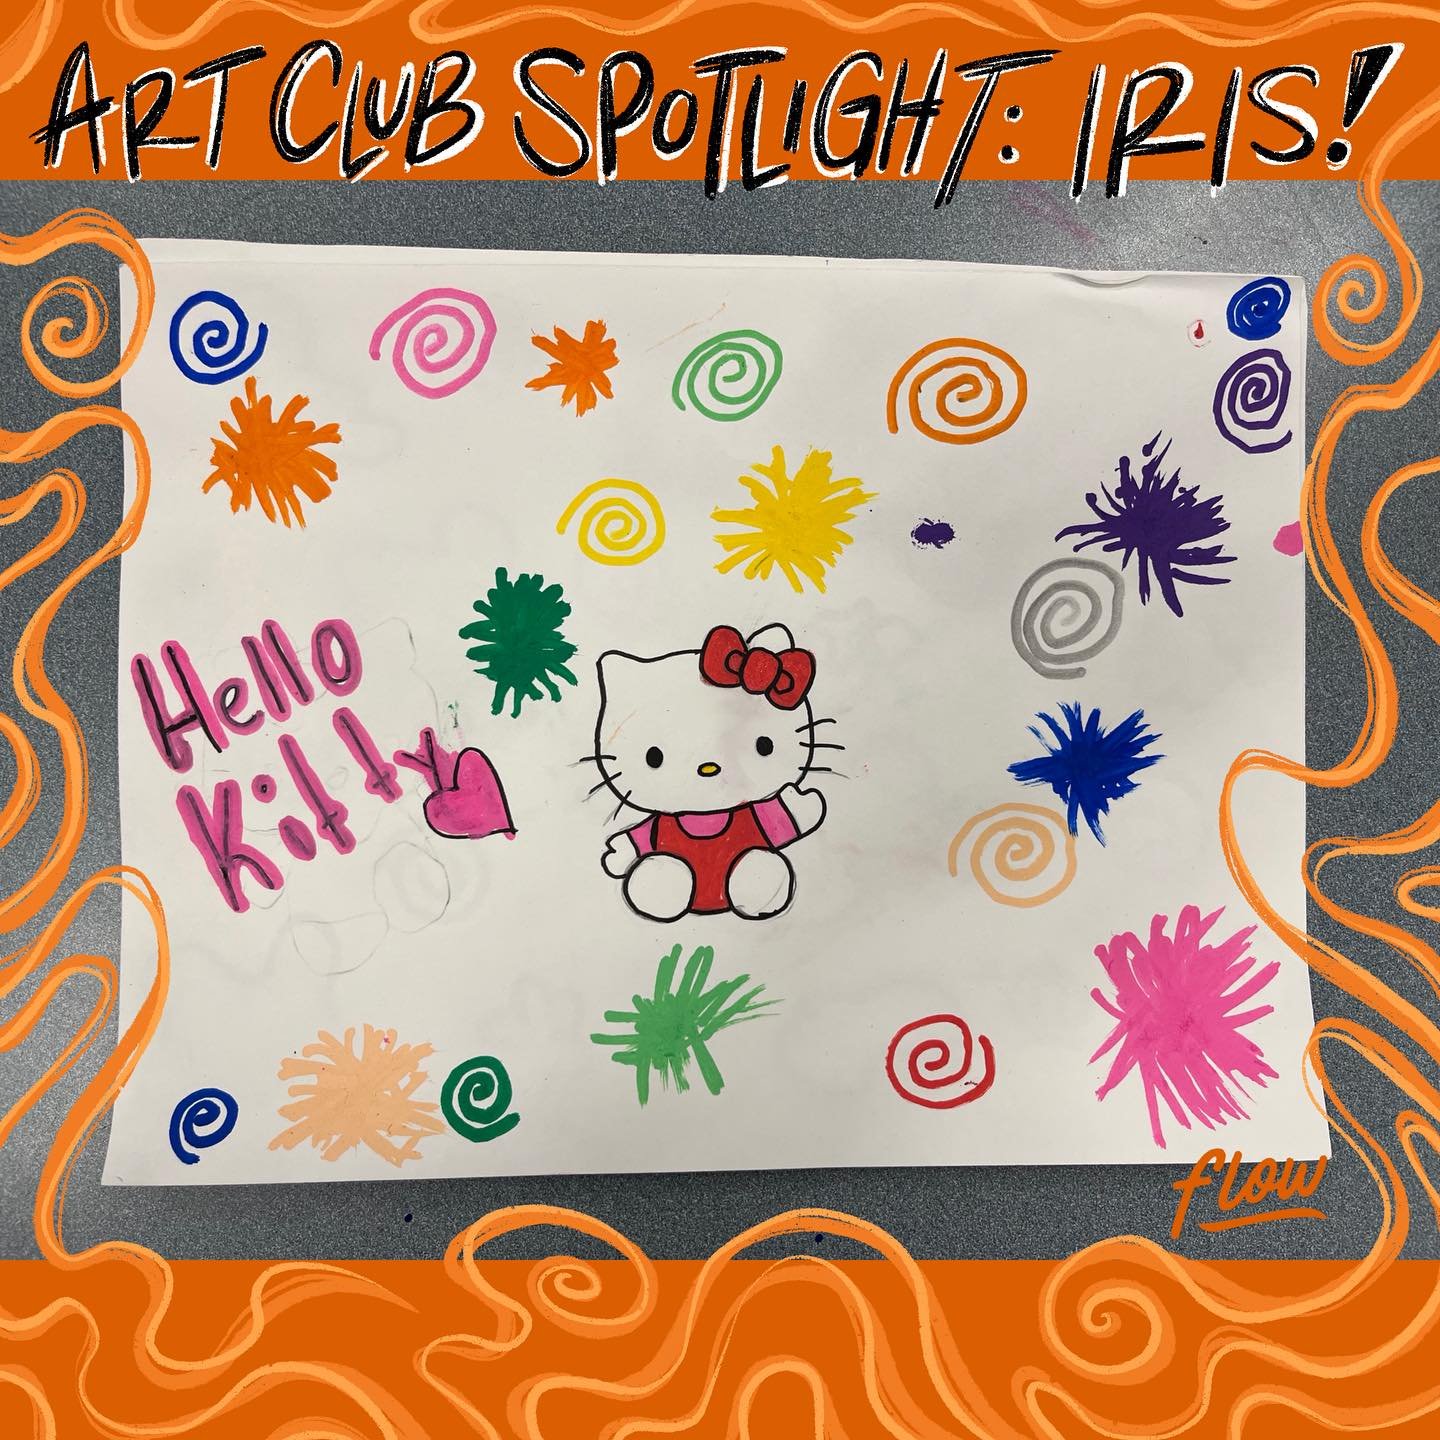 This week in our Art Club Spotlight, we have another newcomer: Iris! #flowlovesyou